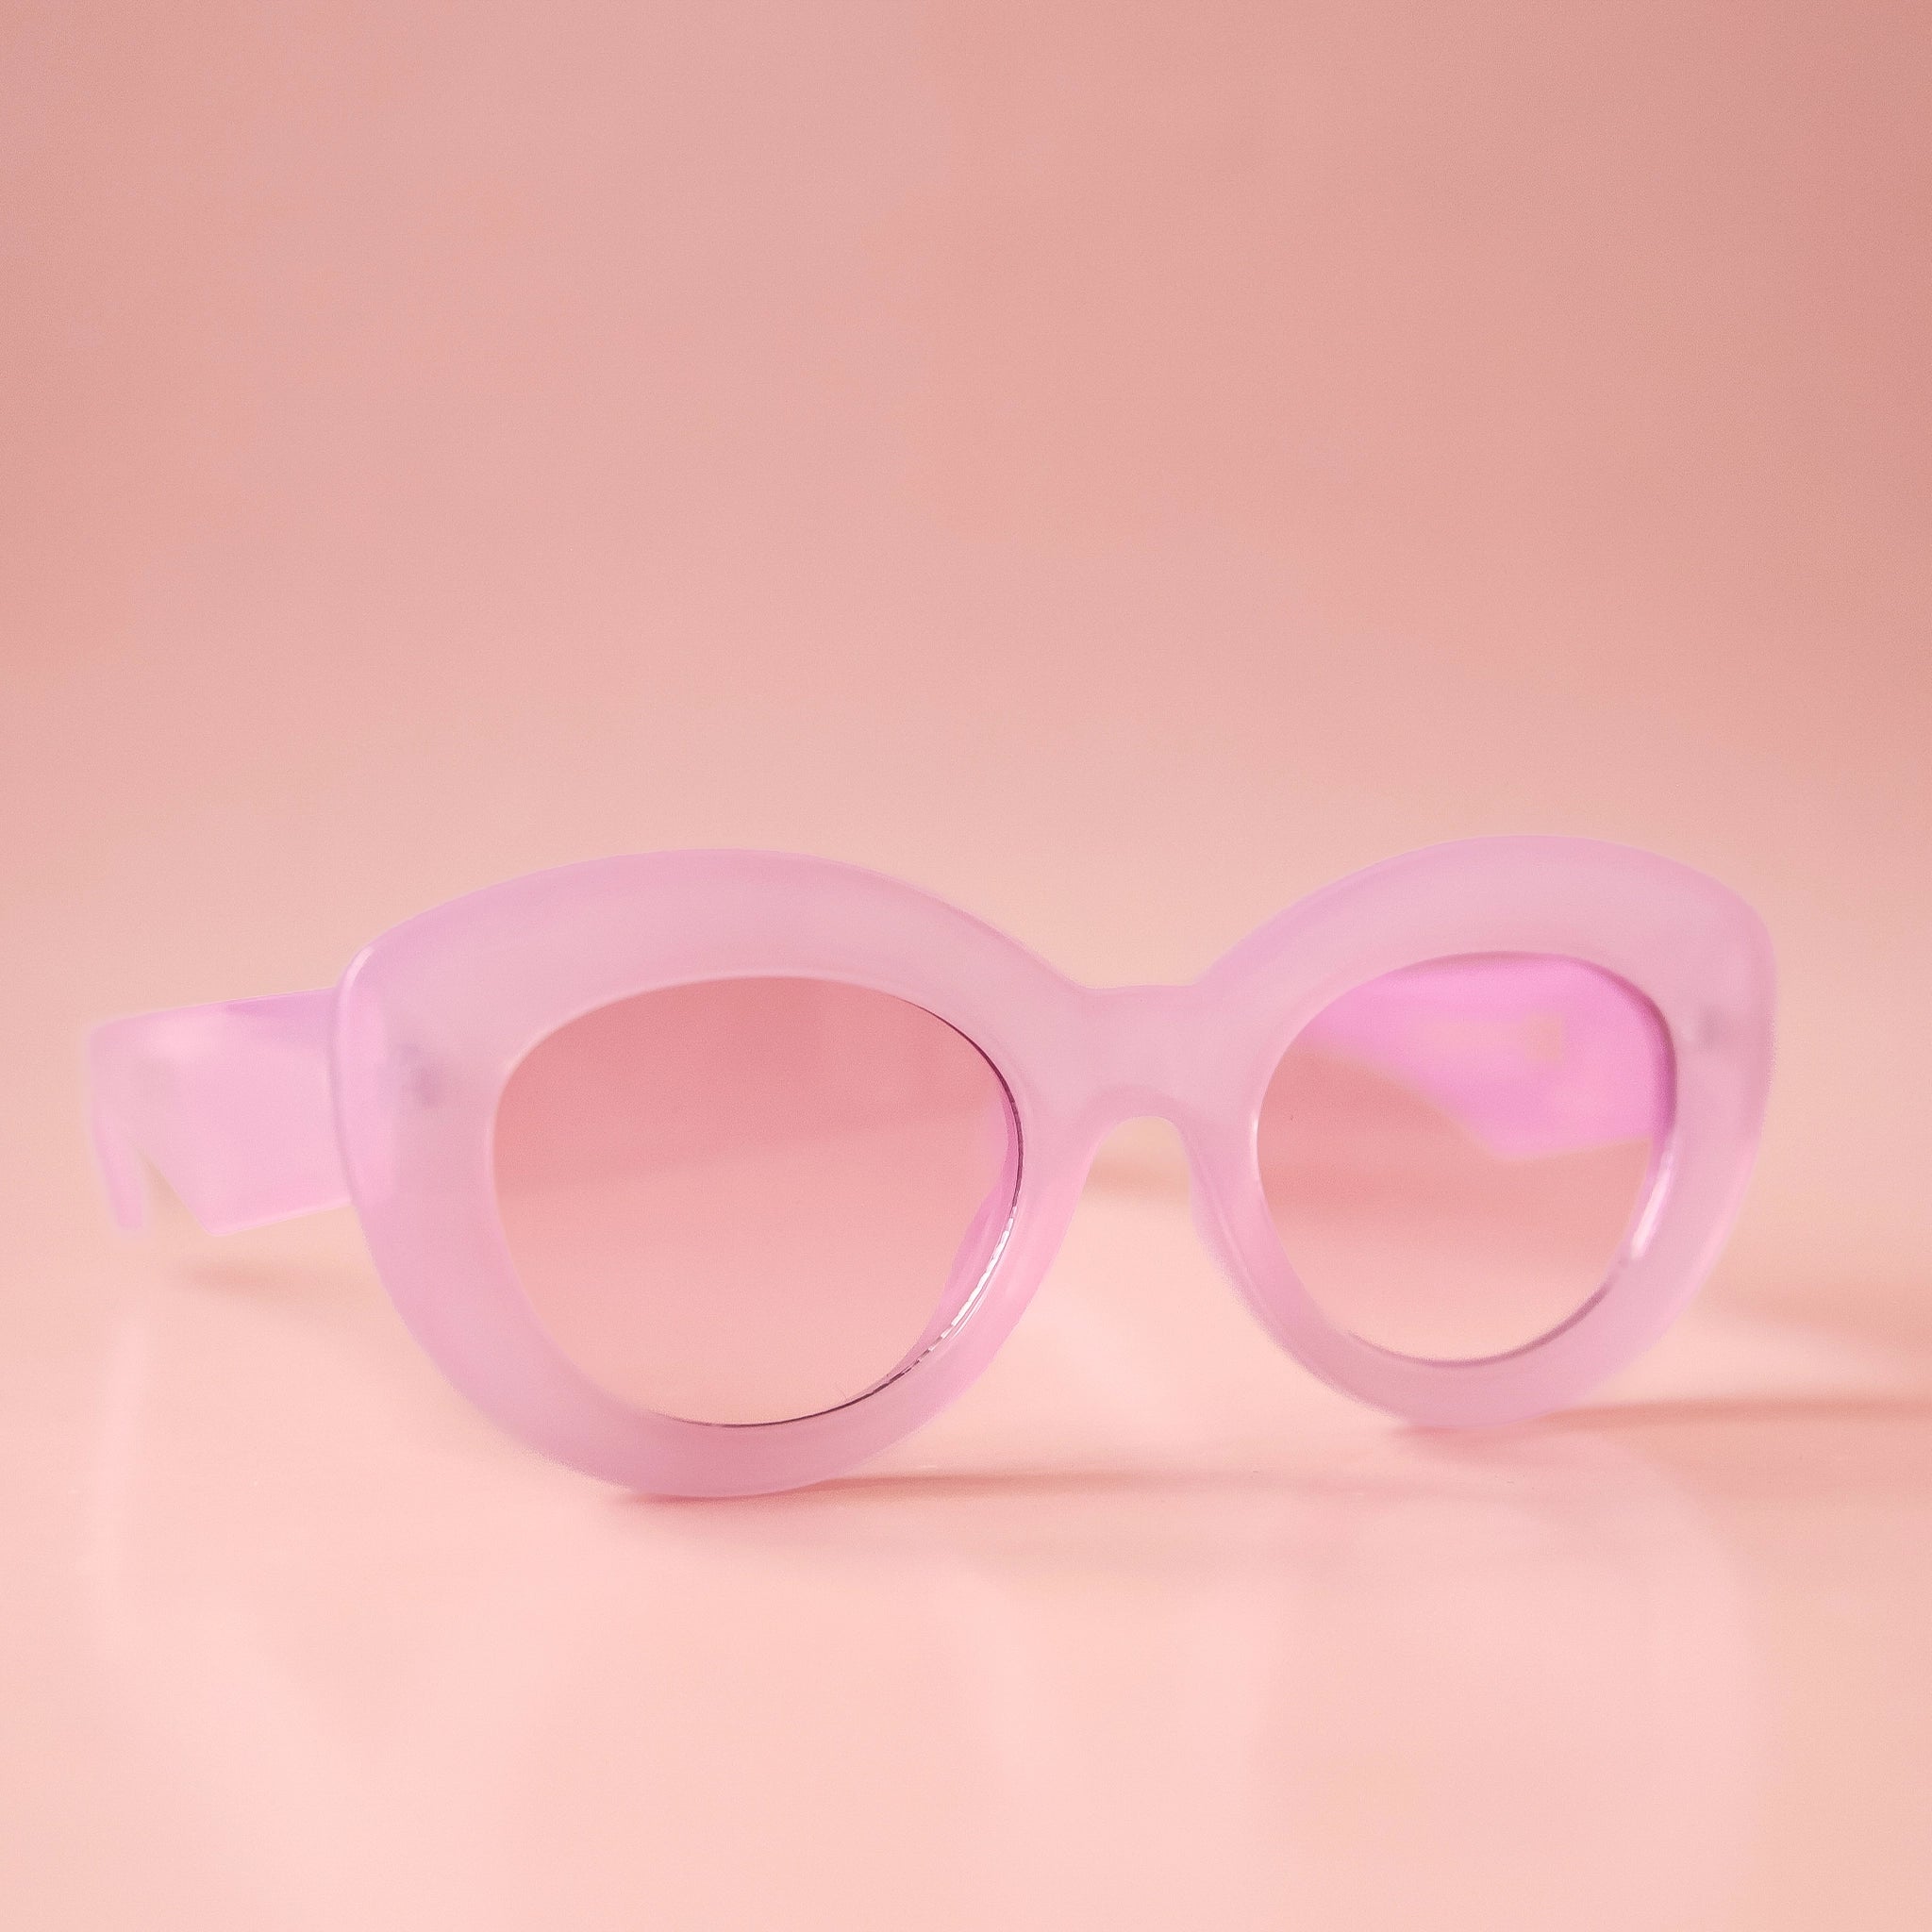 On a peachy background is a pair of light purple sunglasses with a rounded, slightly cat eye shape and a light pink/peach lens.